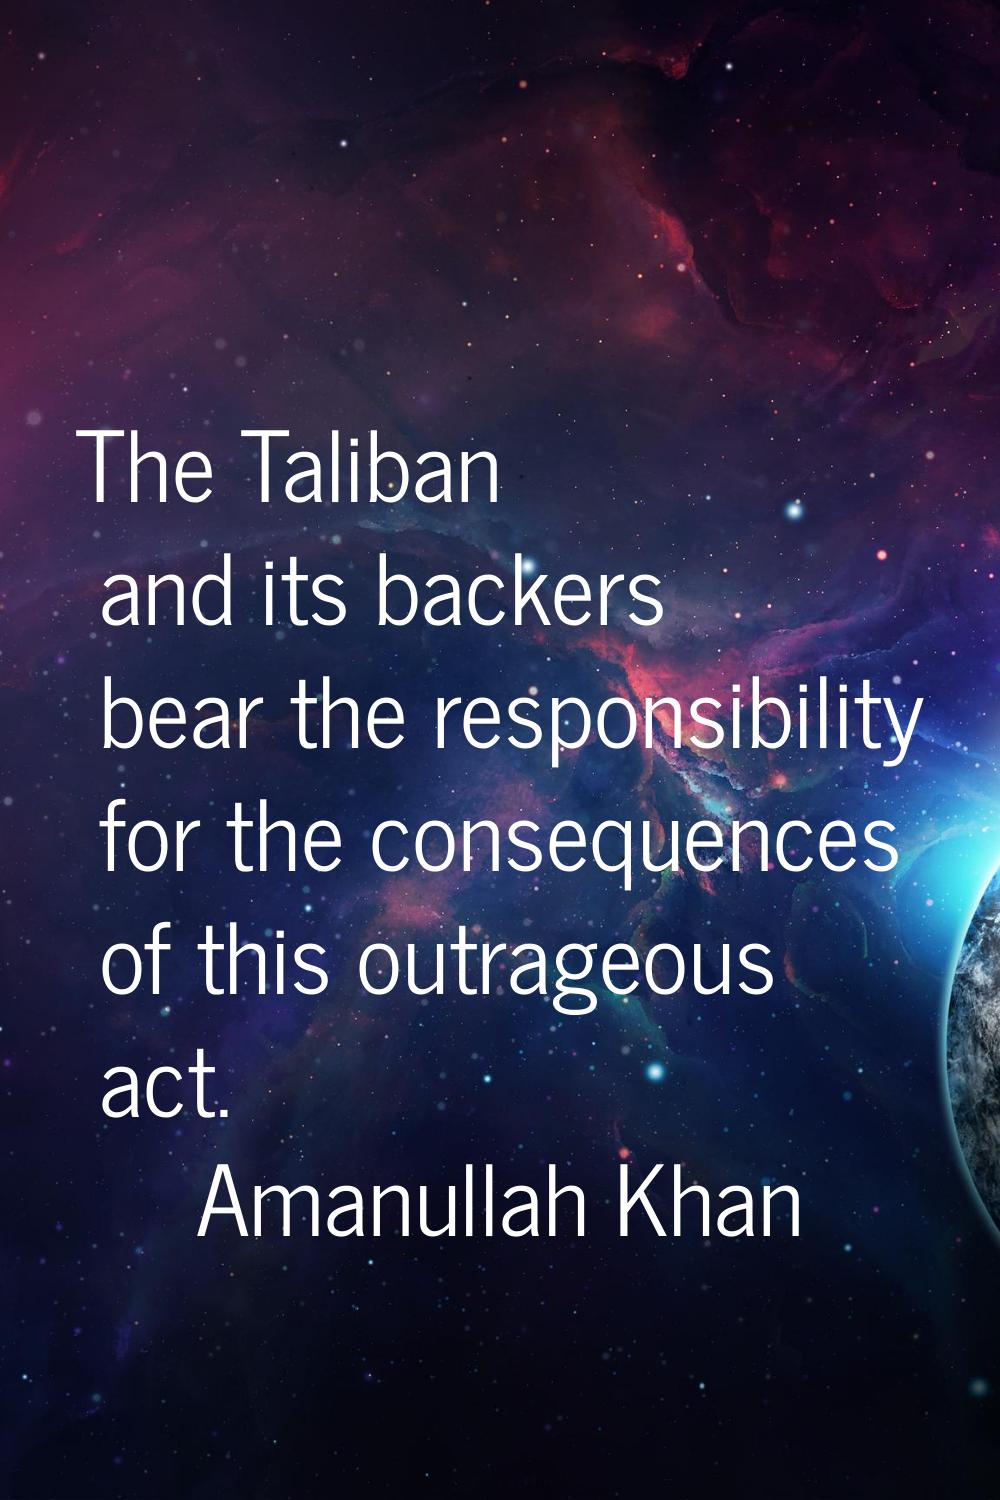 The Taliban and its backers bear the responsibility for the consequences of this outrageous act.